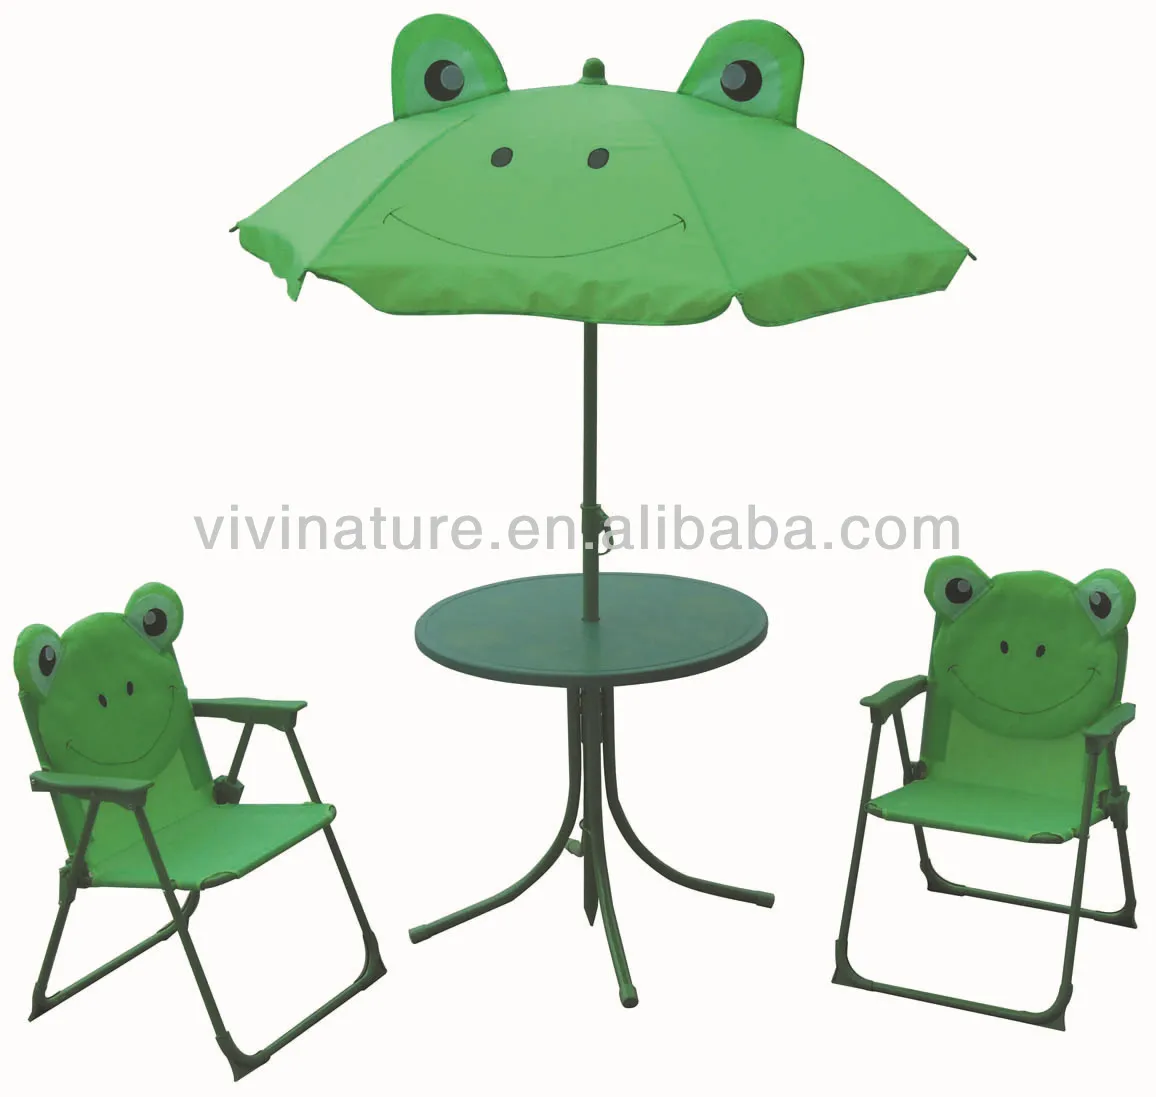 kids folding chair with umbrella